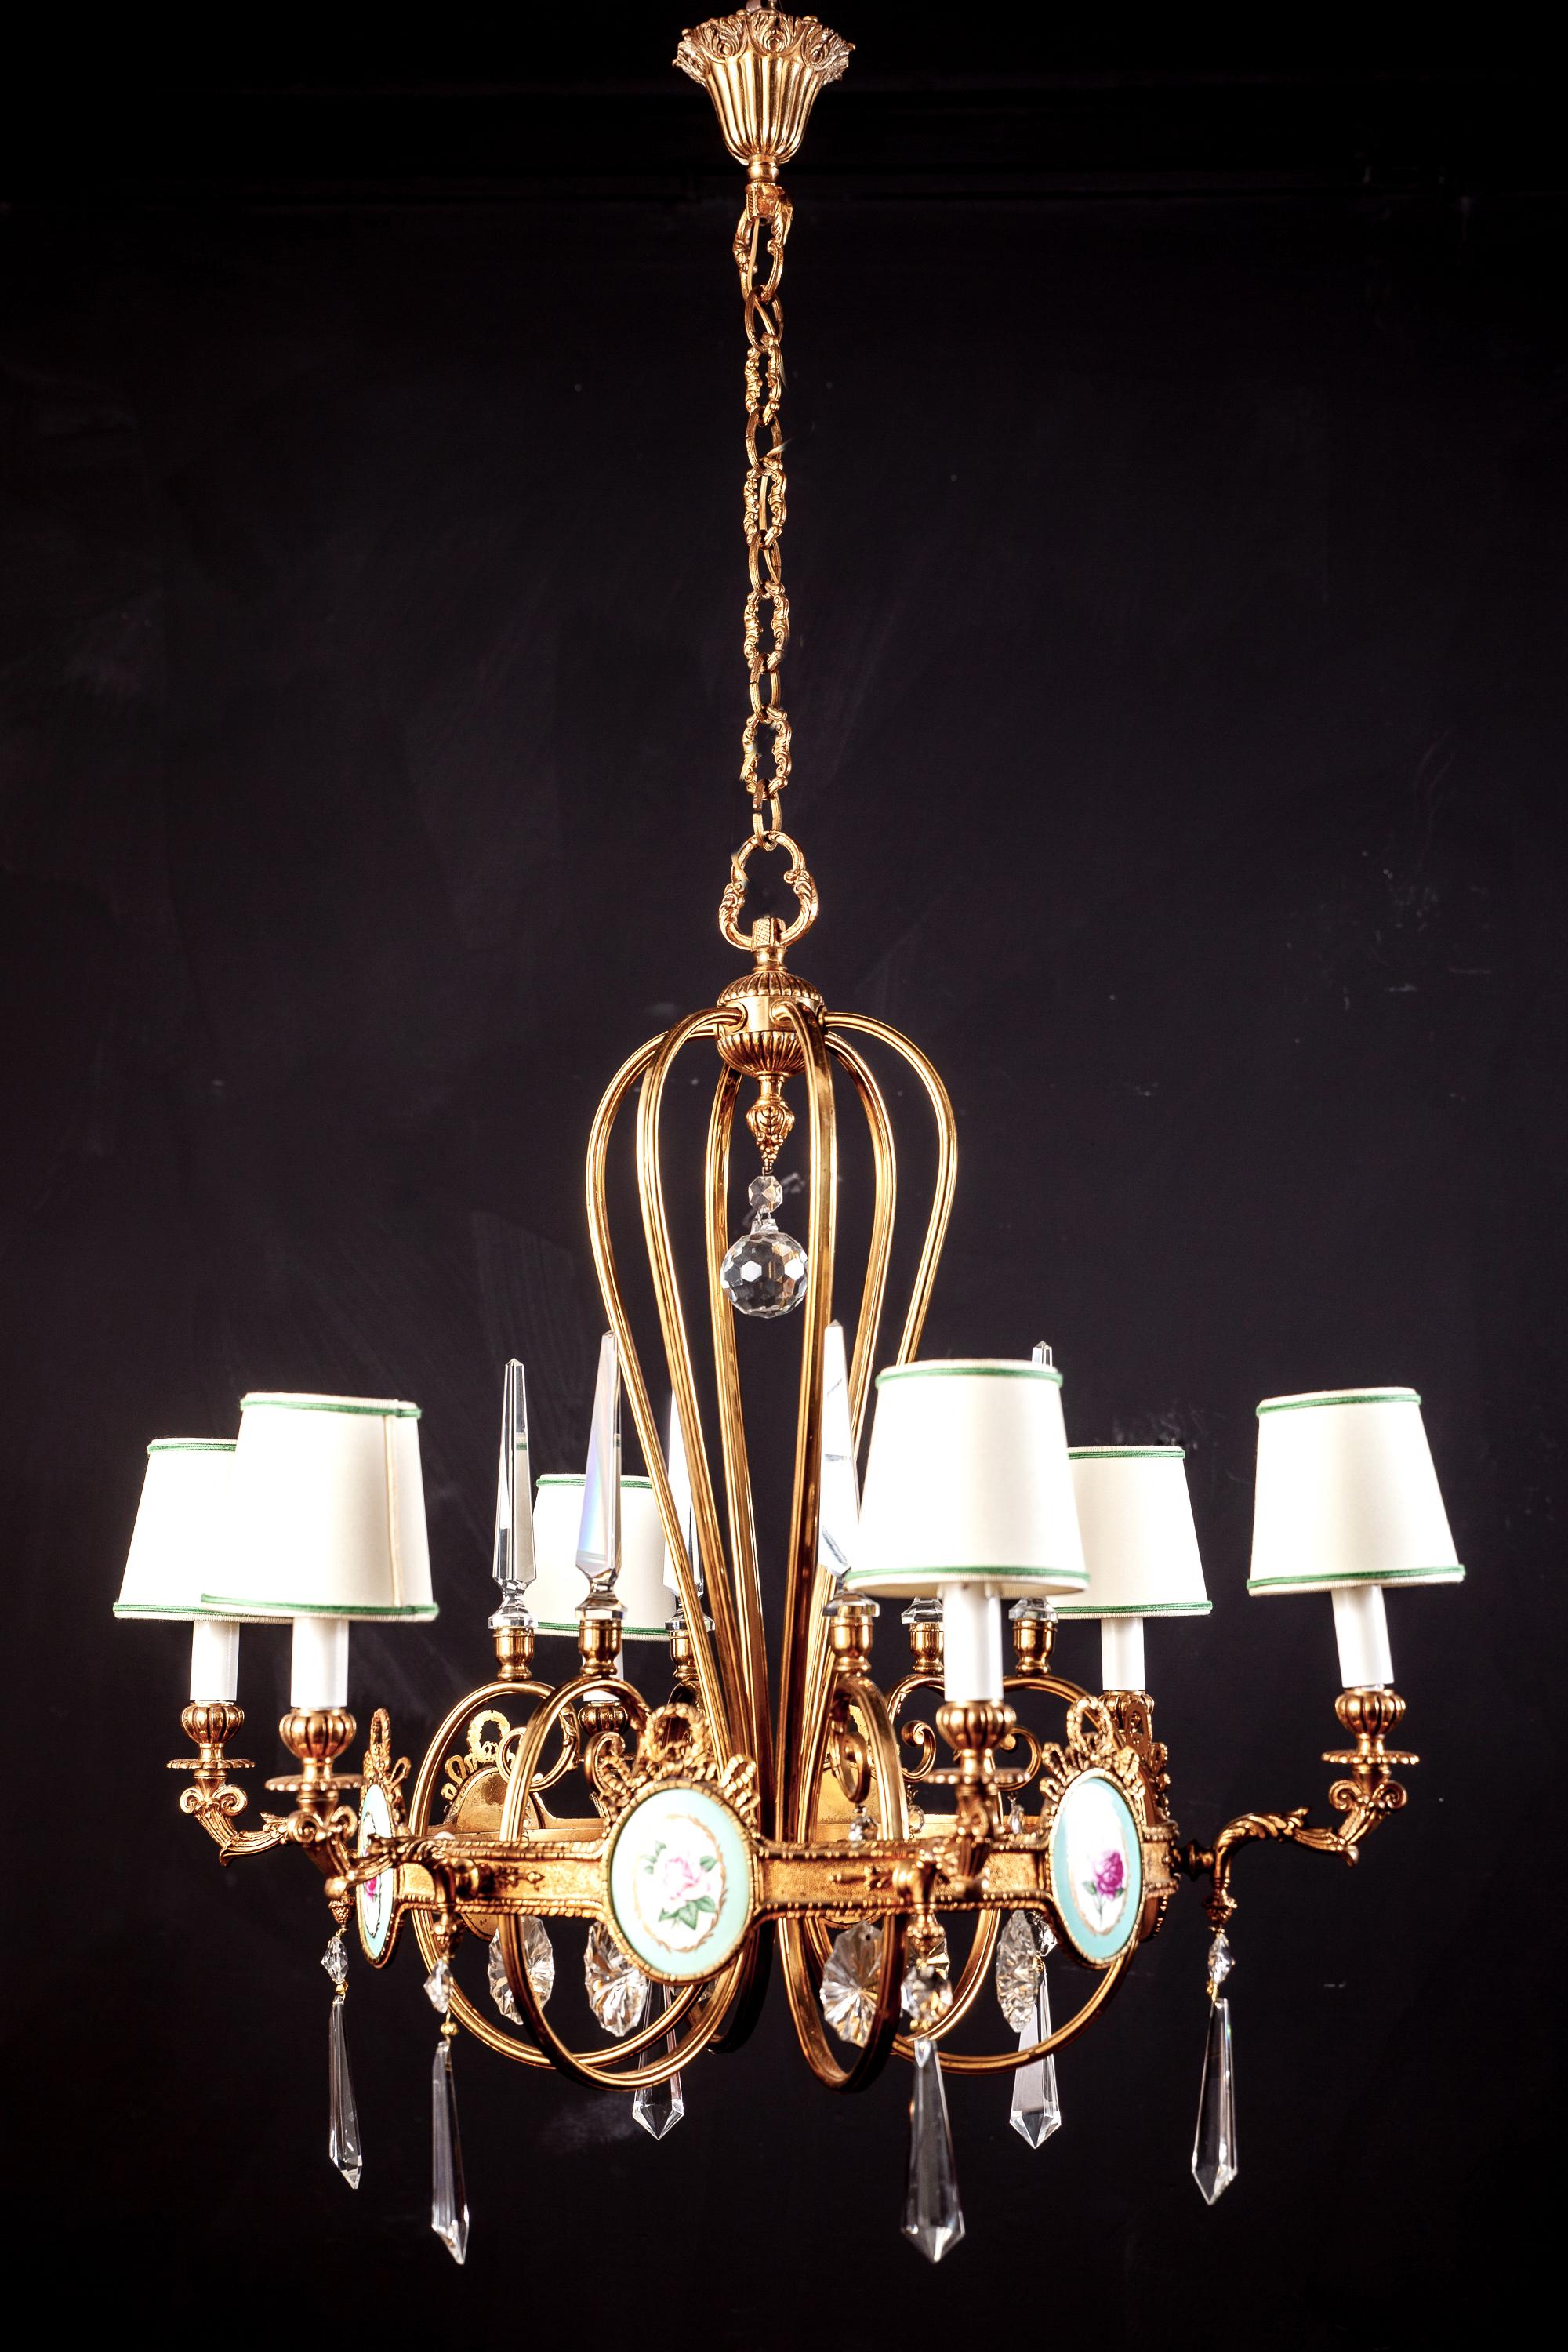 Wonderful six arm Art Deco brass chandelier with fine quality cut crystal pendants adorned with six amazing porcelain plaques decorated with colorful flowers.
Newly rewired six E 14 light bulbs with a white and green rimmed shades.